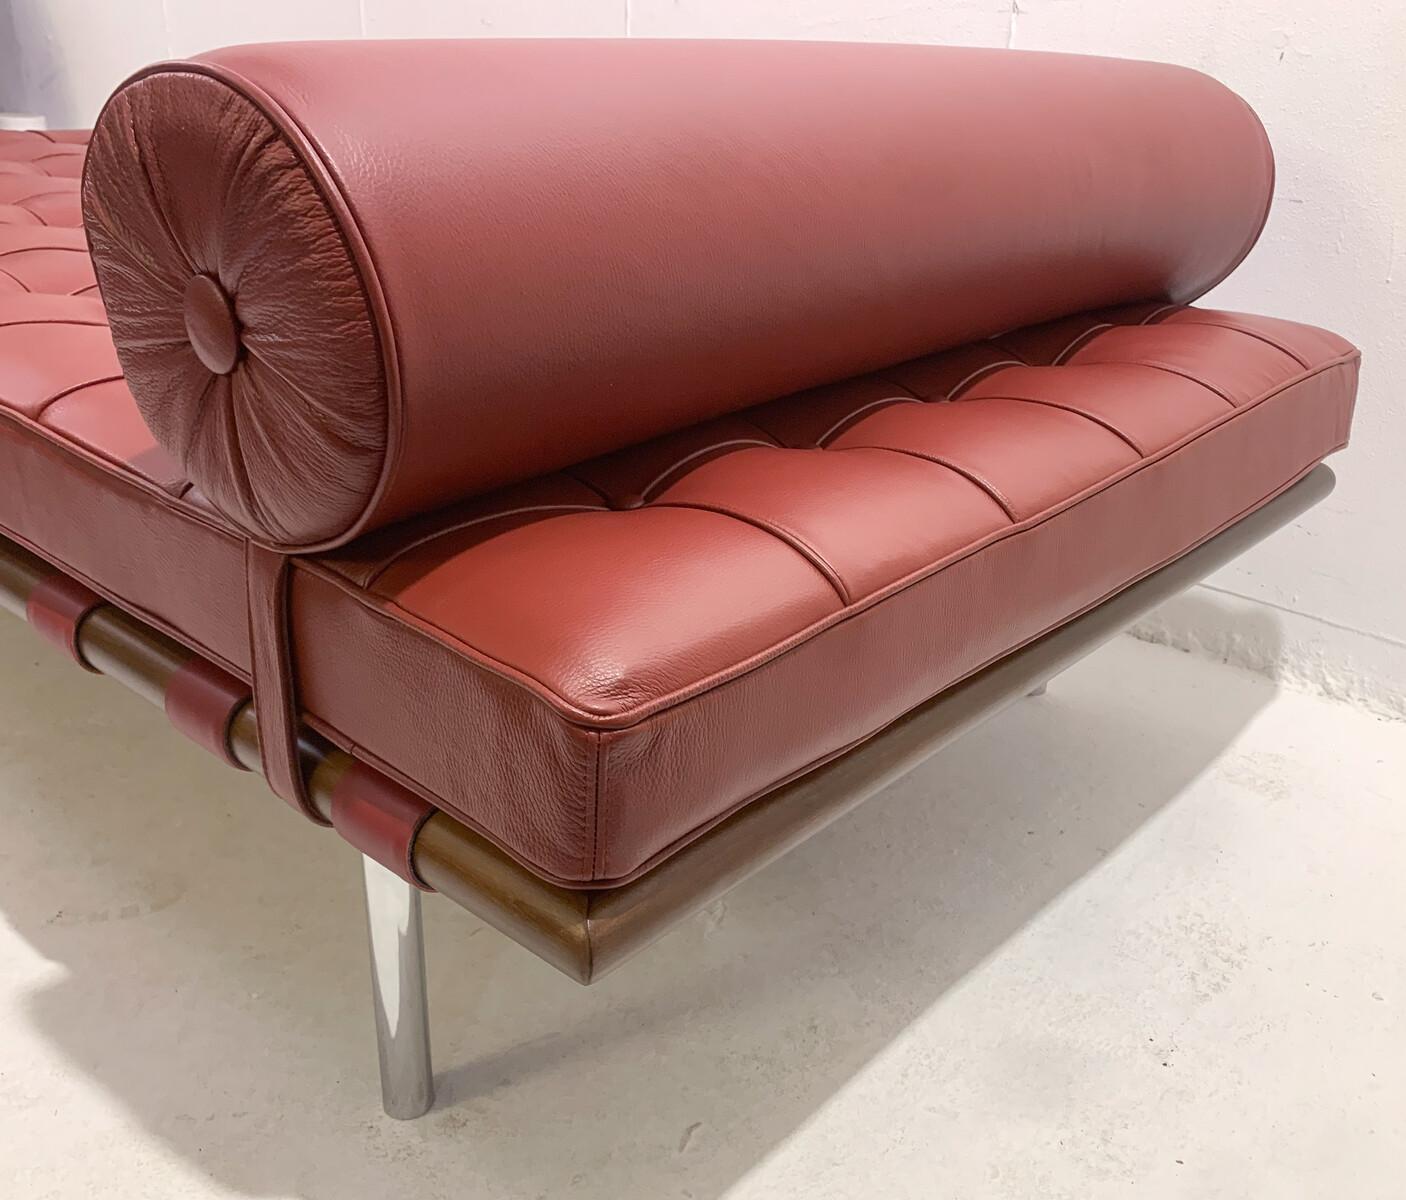 Italian Barcelona Daybed by Ludwig Mies van der Rohe for Knoll, Burgundy Leather, 1990s For Sale